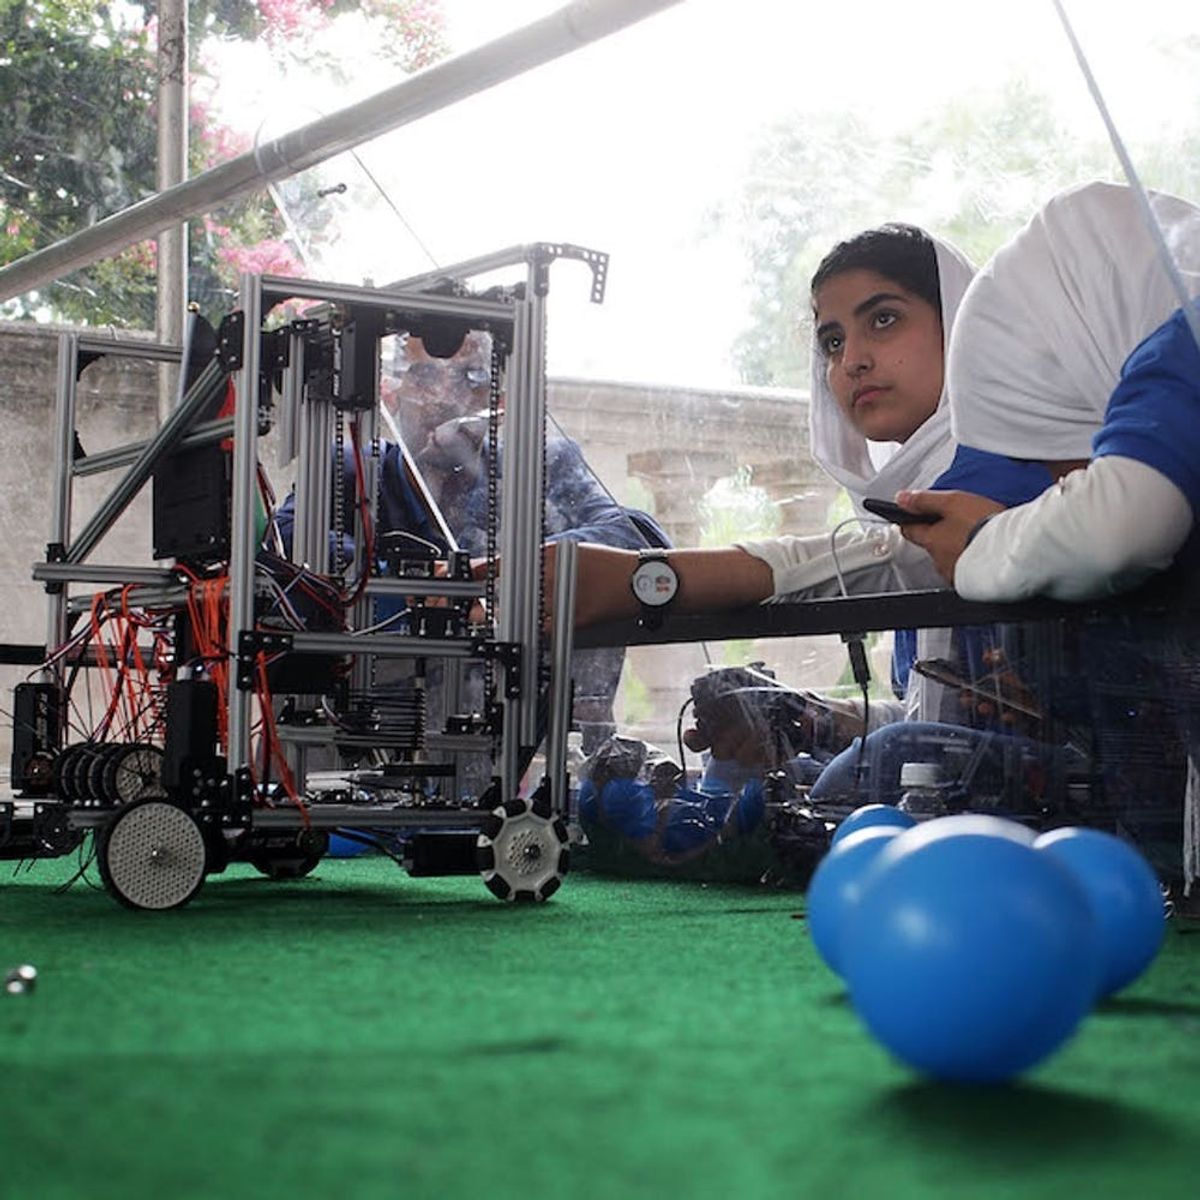 Nearly Denied US Entry, This Afghan Girl Robotics Team Just Won Silver